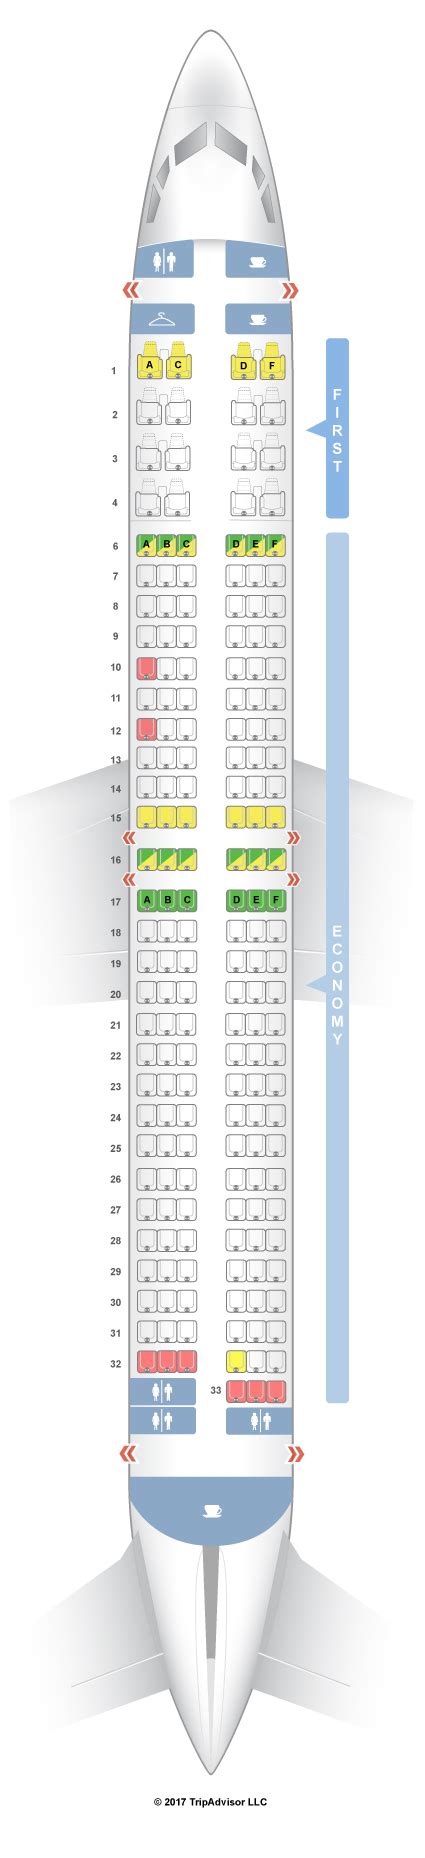 737 900 alaska seat map. Our picks: 11D, 21A, 21F. Featuring Delta's new interiors, the 737-900 offers a fair amount of space with noticeably larger seatback video screens (11 and 9 inches, versus 6). 15A is missing a window for ductwork in the fuselage, and row 29 window seats have a misaligned window, so avoid those if you're seeking a window seat. 